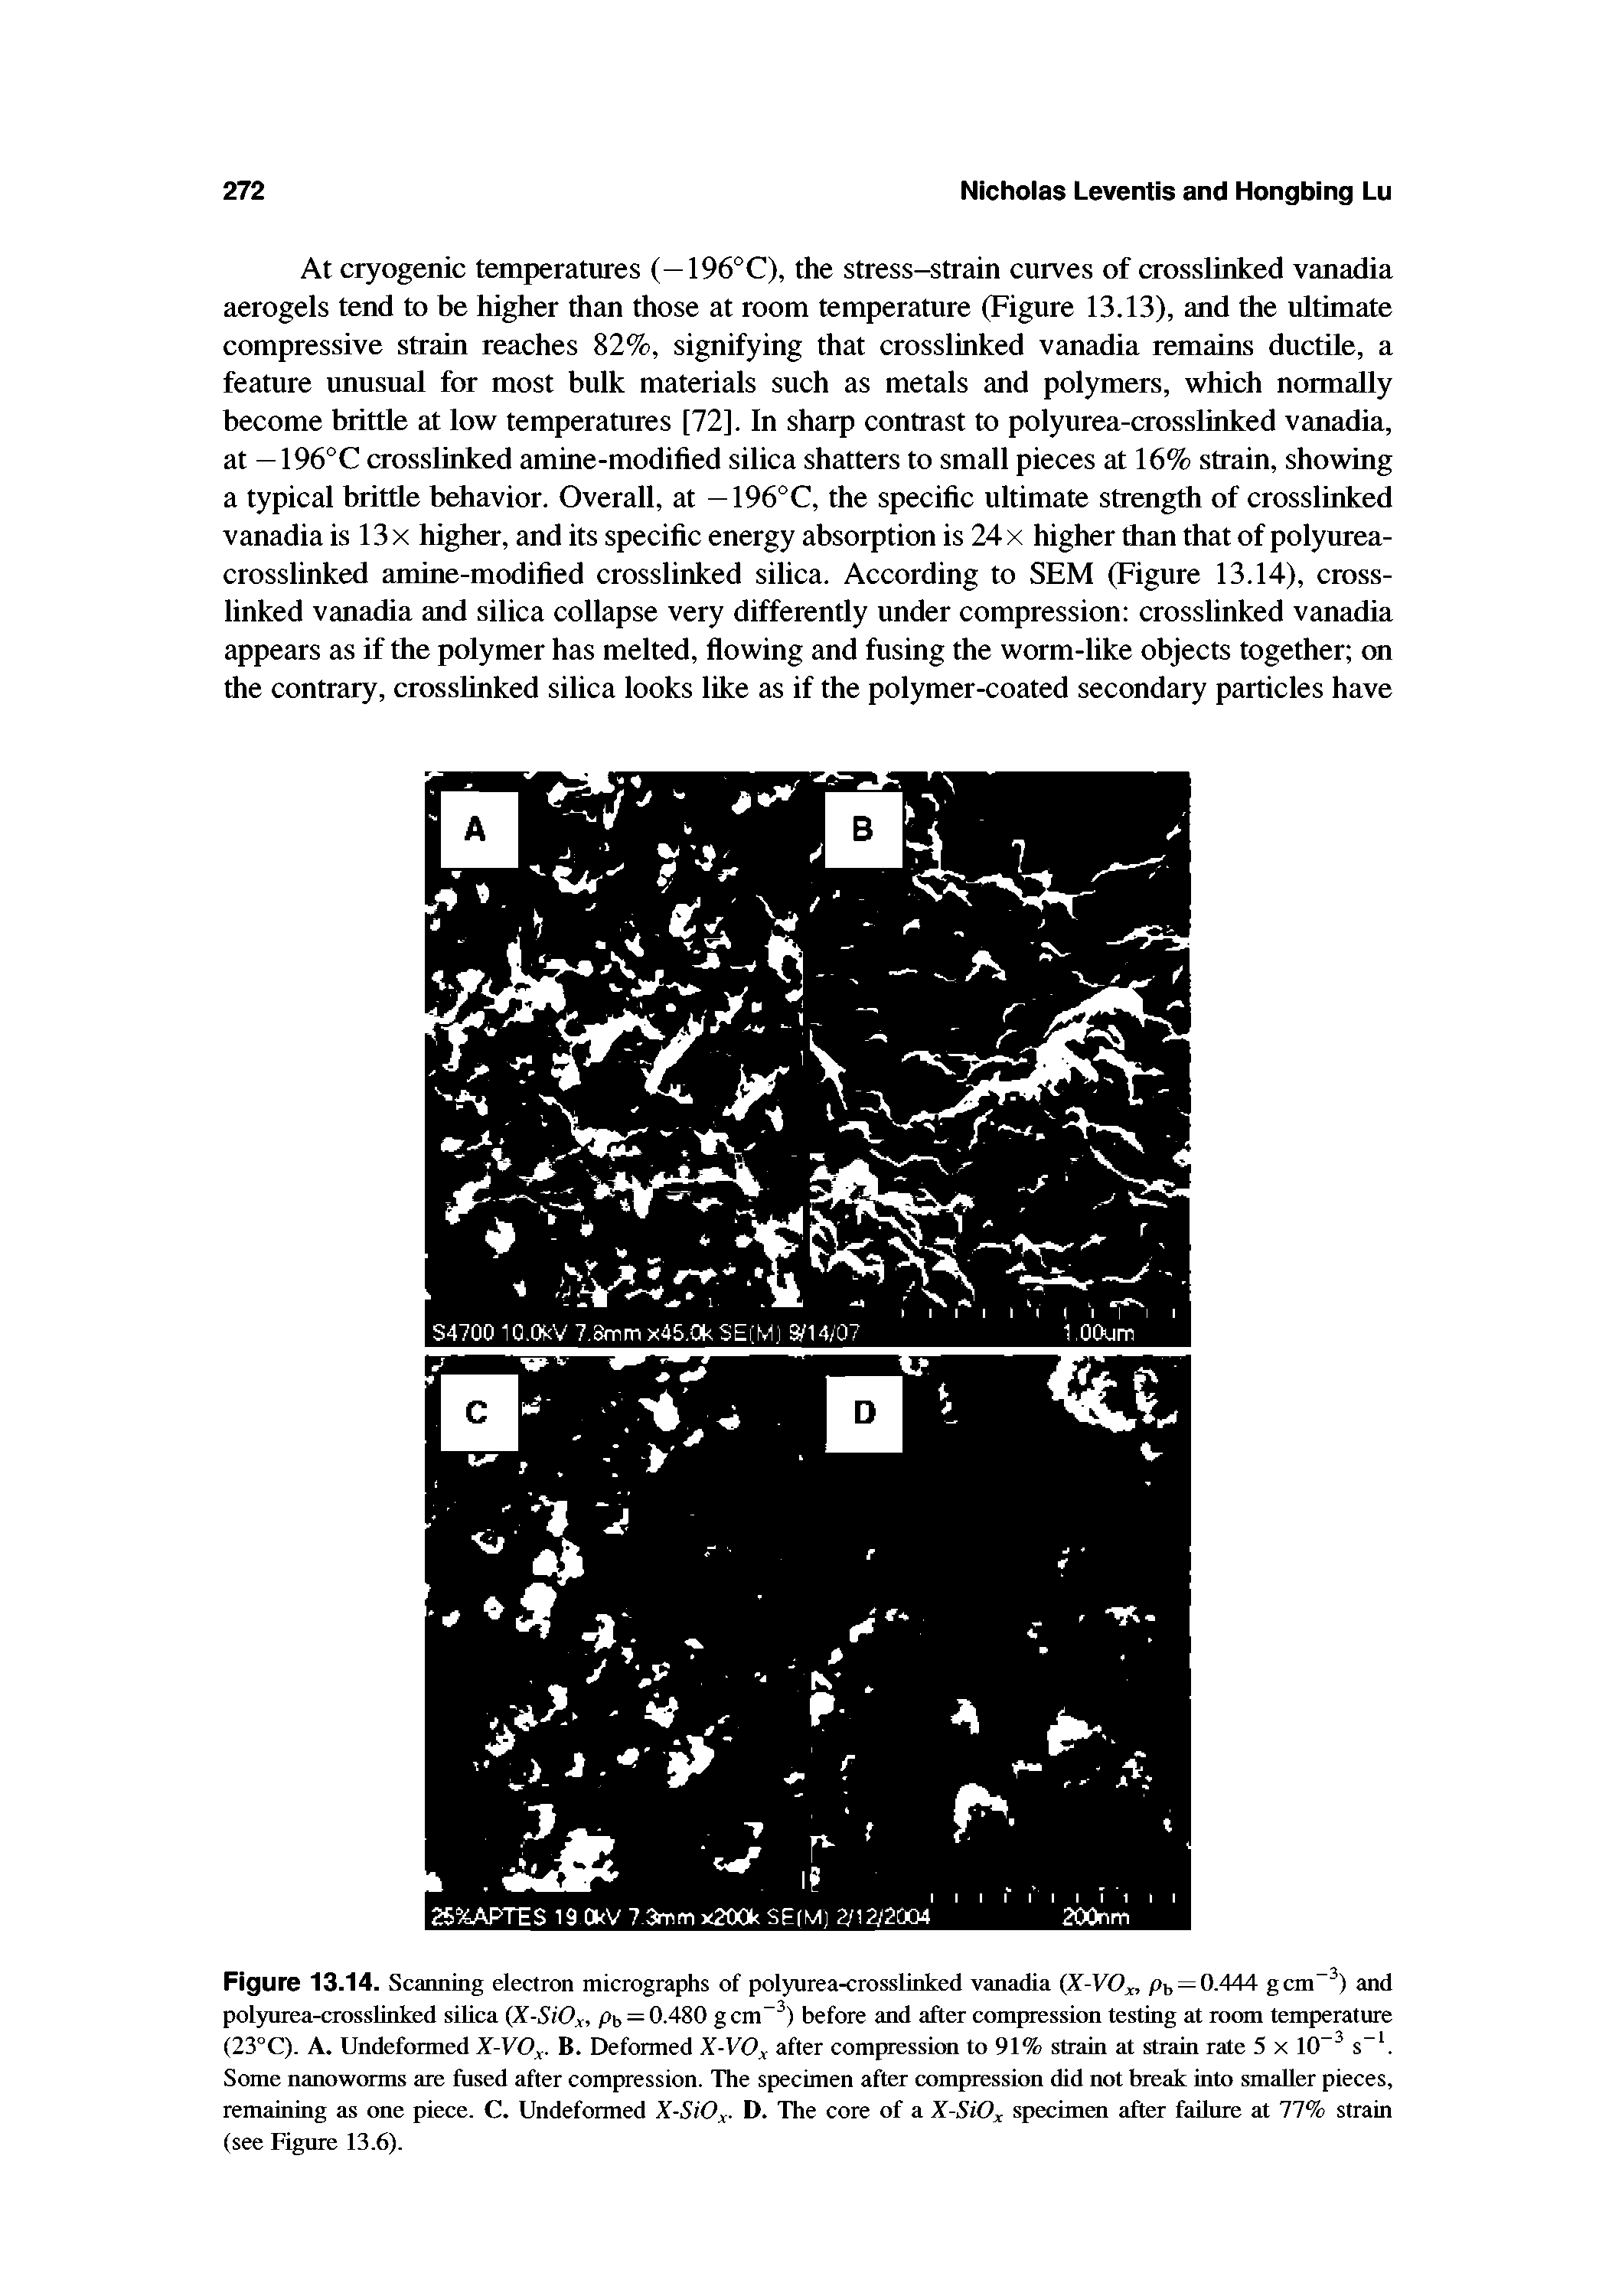 Figure 13.14. Scanning electron micrographs of polyurea-crosslinked vanadia (X-VO pt = 0.444 gcm" ) and polyurea-crosslinked silica (X-SiOx, pb = 0.480 g cm ) before and after compression testing at room temperature (23°C). A. Undeformed X-VO - B. Deformed X-VO after compression to 91% strain at strain rate 5 x 10" s" . Some nanoworms are fused after compression. The specimen after compression did not break into smaller pieces, remaining as one piece. C. Undeformed X-SiO - D. The core of a X-SiOx specimen after faUuie at 77% strain (see Figure 13.6).